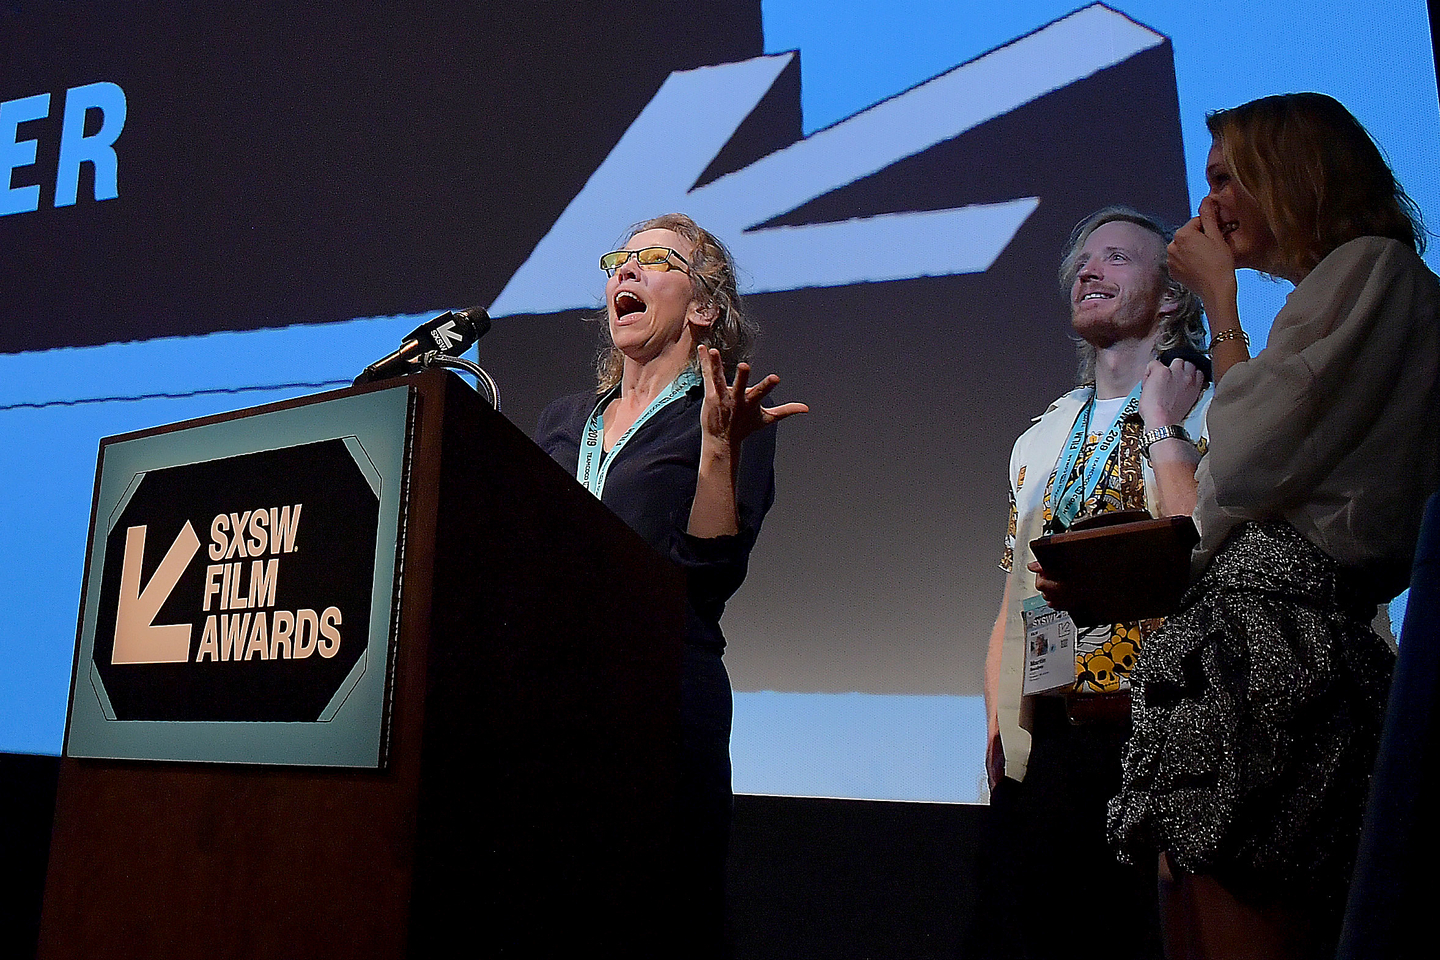 Josephine Mackerras accepts an award for her film Aliceat the SXSW Film Awards at the Paramount Theatre.